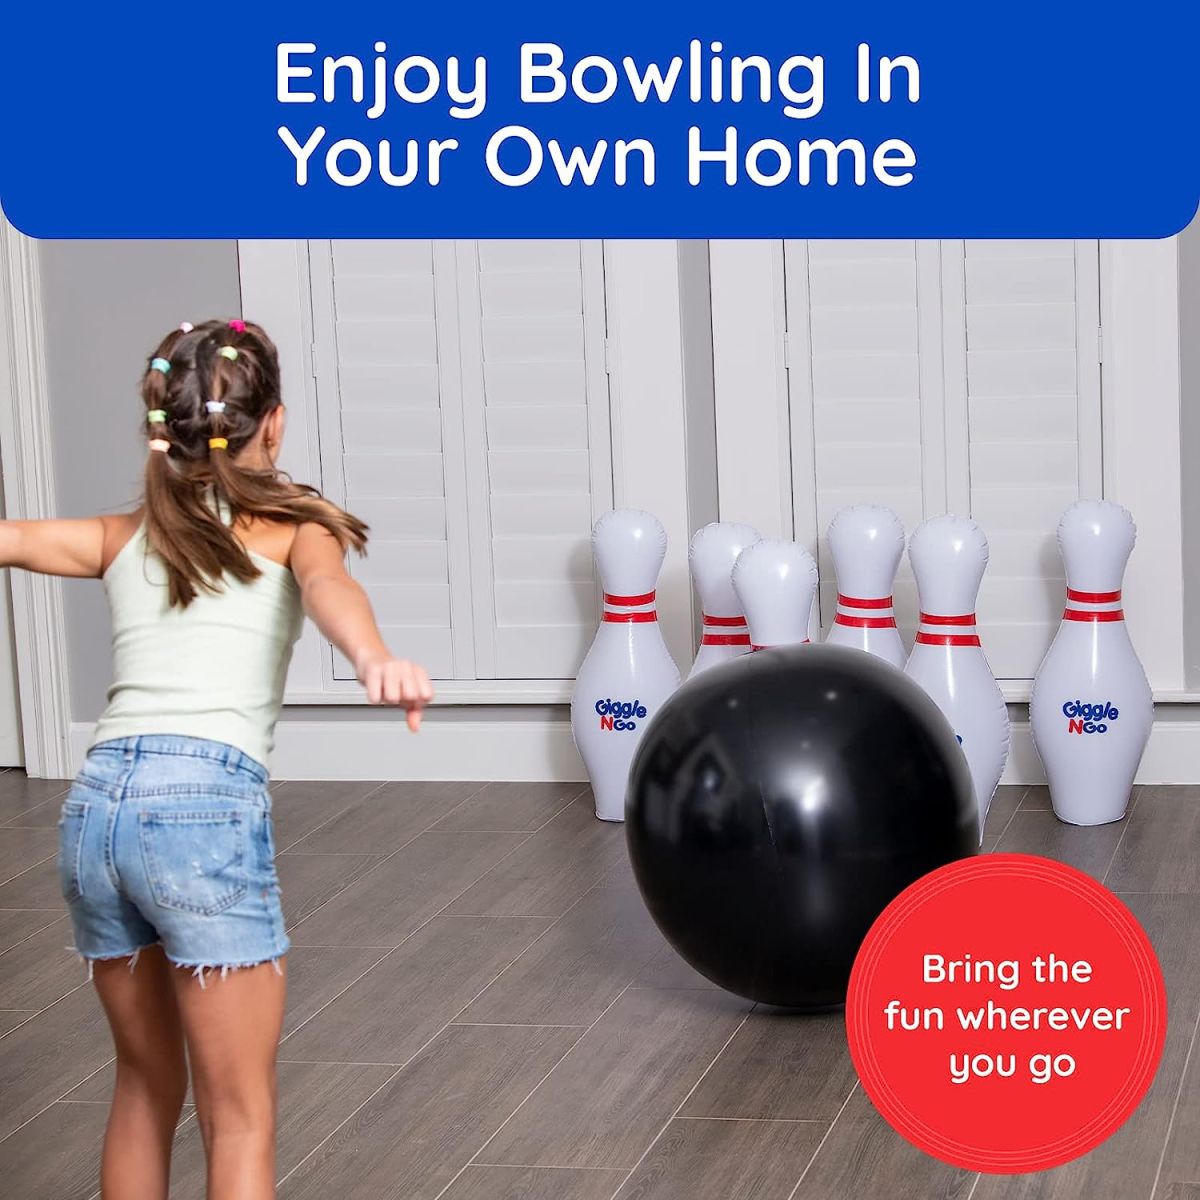 Giggle N Go Kids Bowling Set Indoor Games or Outdoor Games for Kids. Hilariously Fun Giant Yard Games for Kids and Adults. Fun Sports Games, Outside Games or Indoor Games for Kids